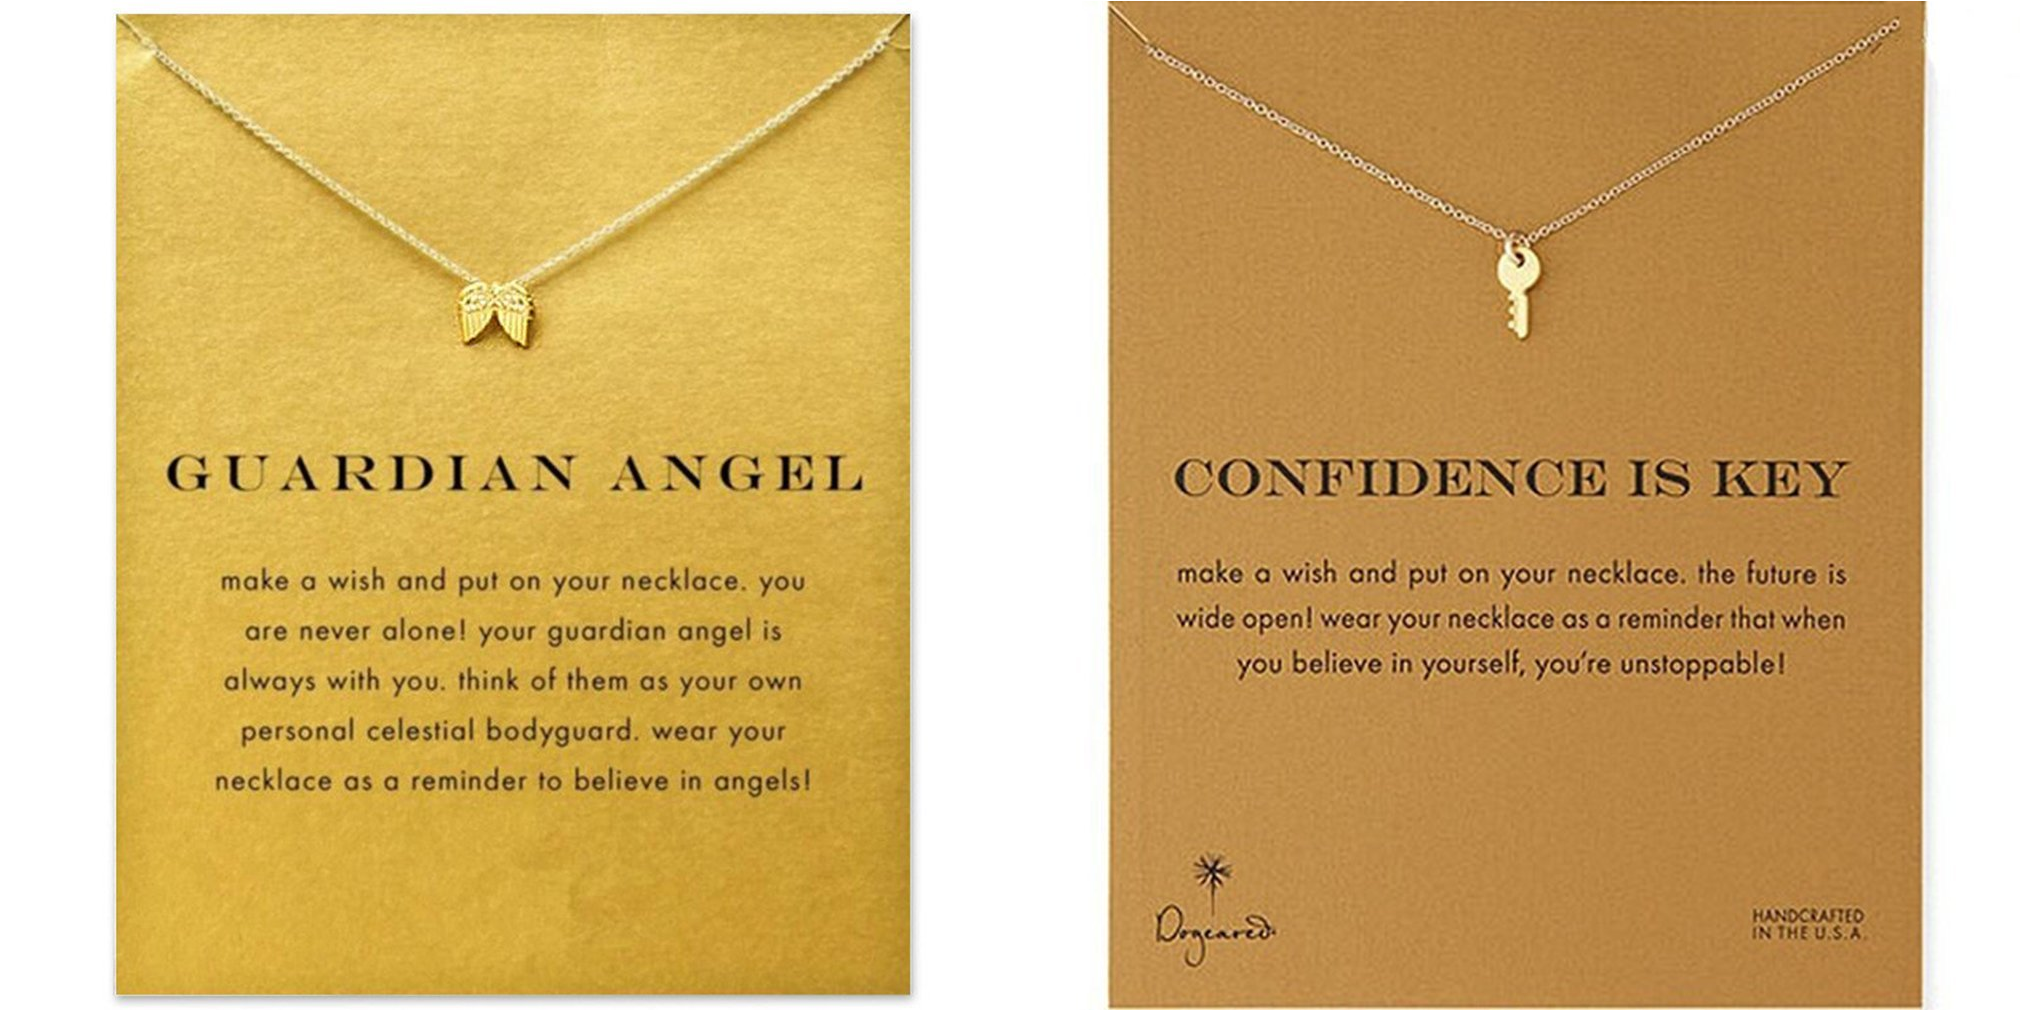 Inspirational Necklaces Only $2.31 Shipped! Confidence, Karma, Luck, Guardian Angel, and MORE!